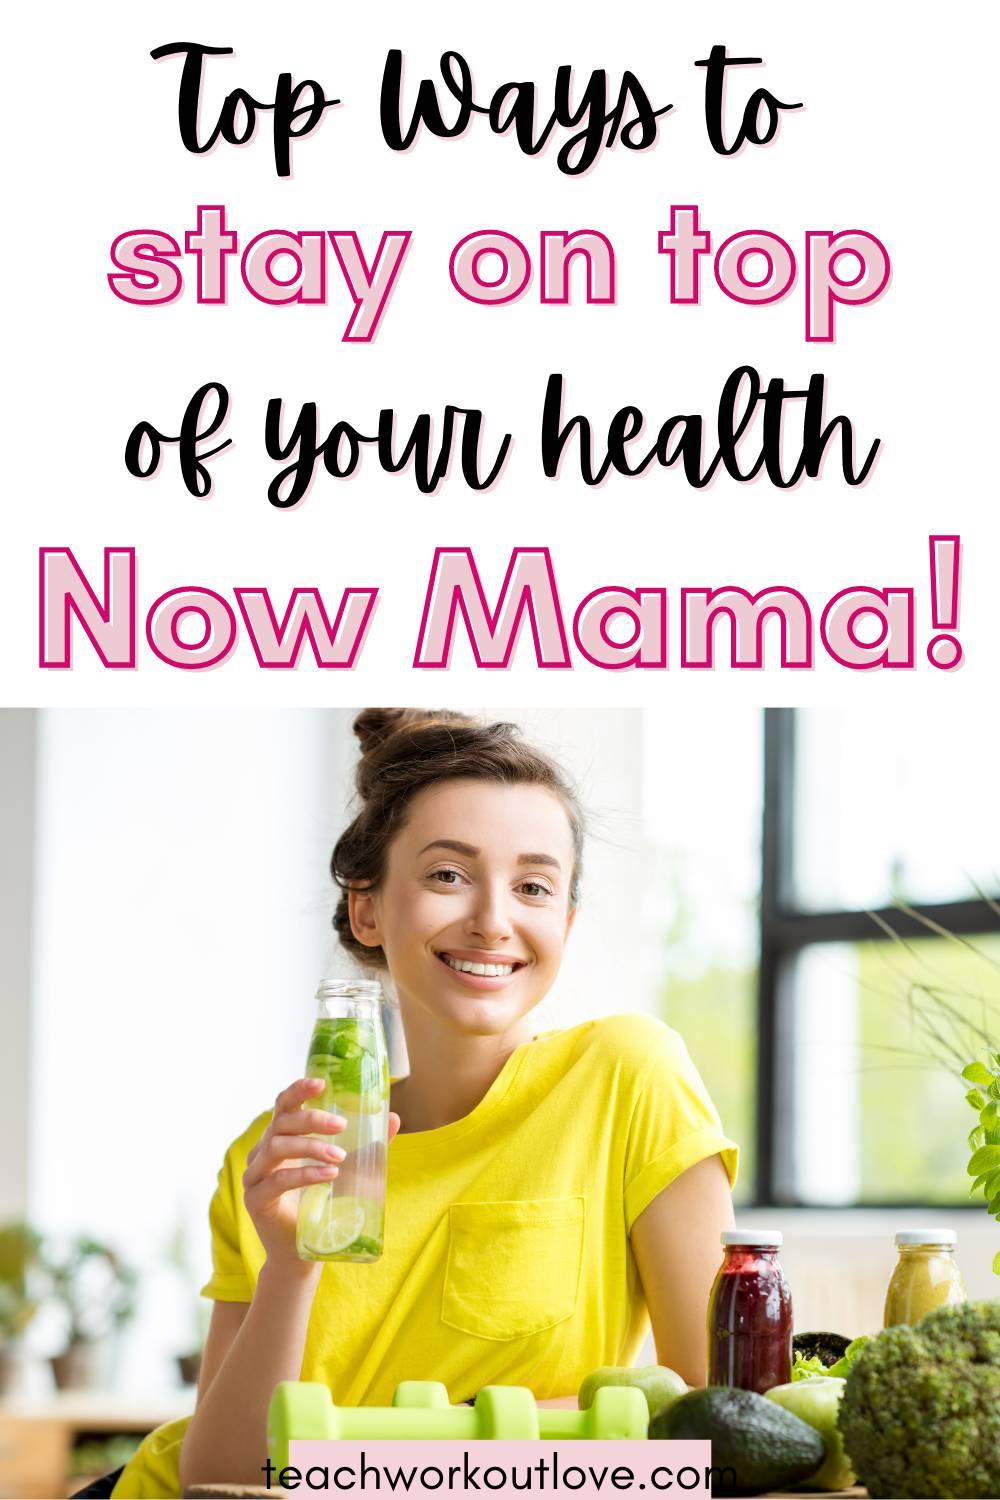 Here are some of the top practical ways moms can stay on top of their health now, so they don't feel overwhelmed by the end of the day.